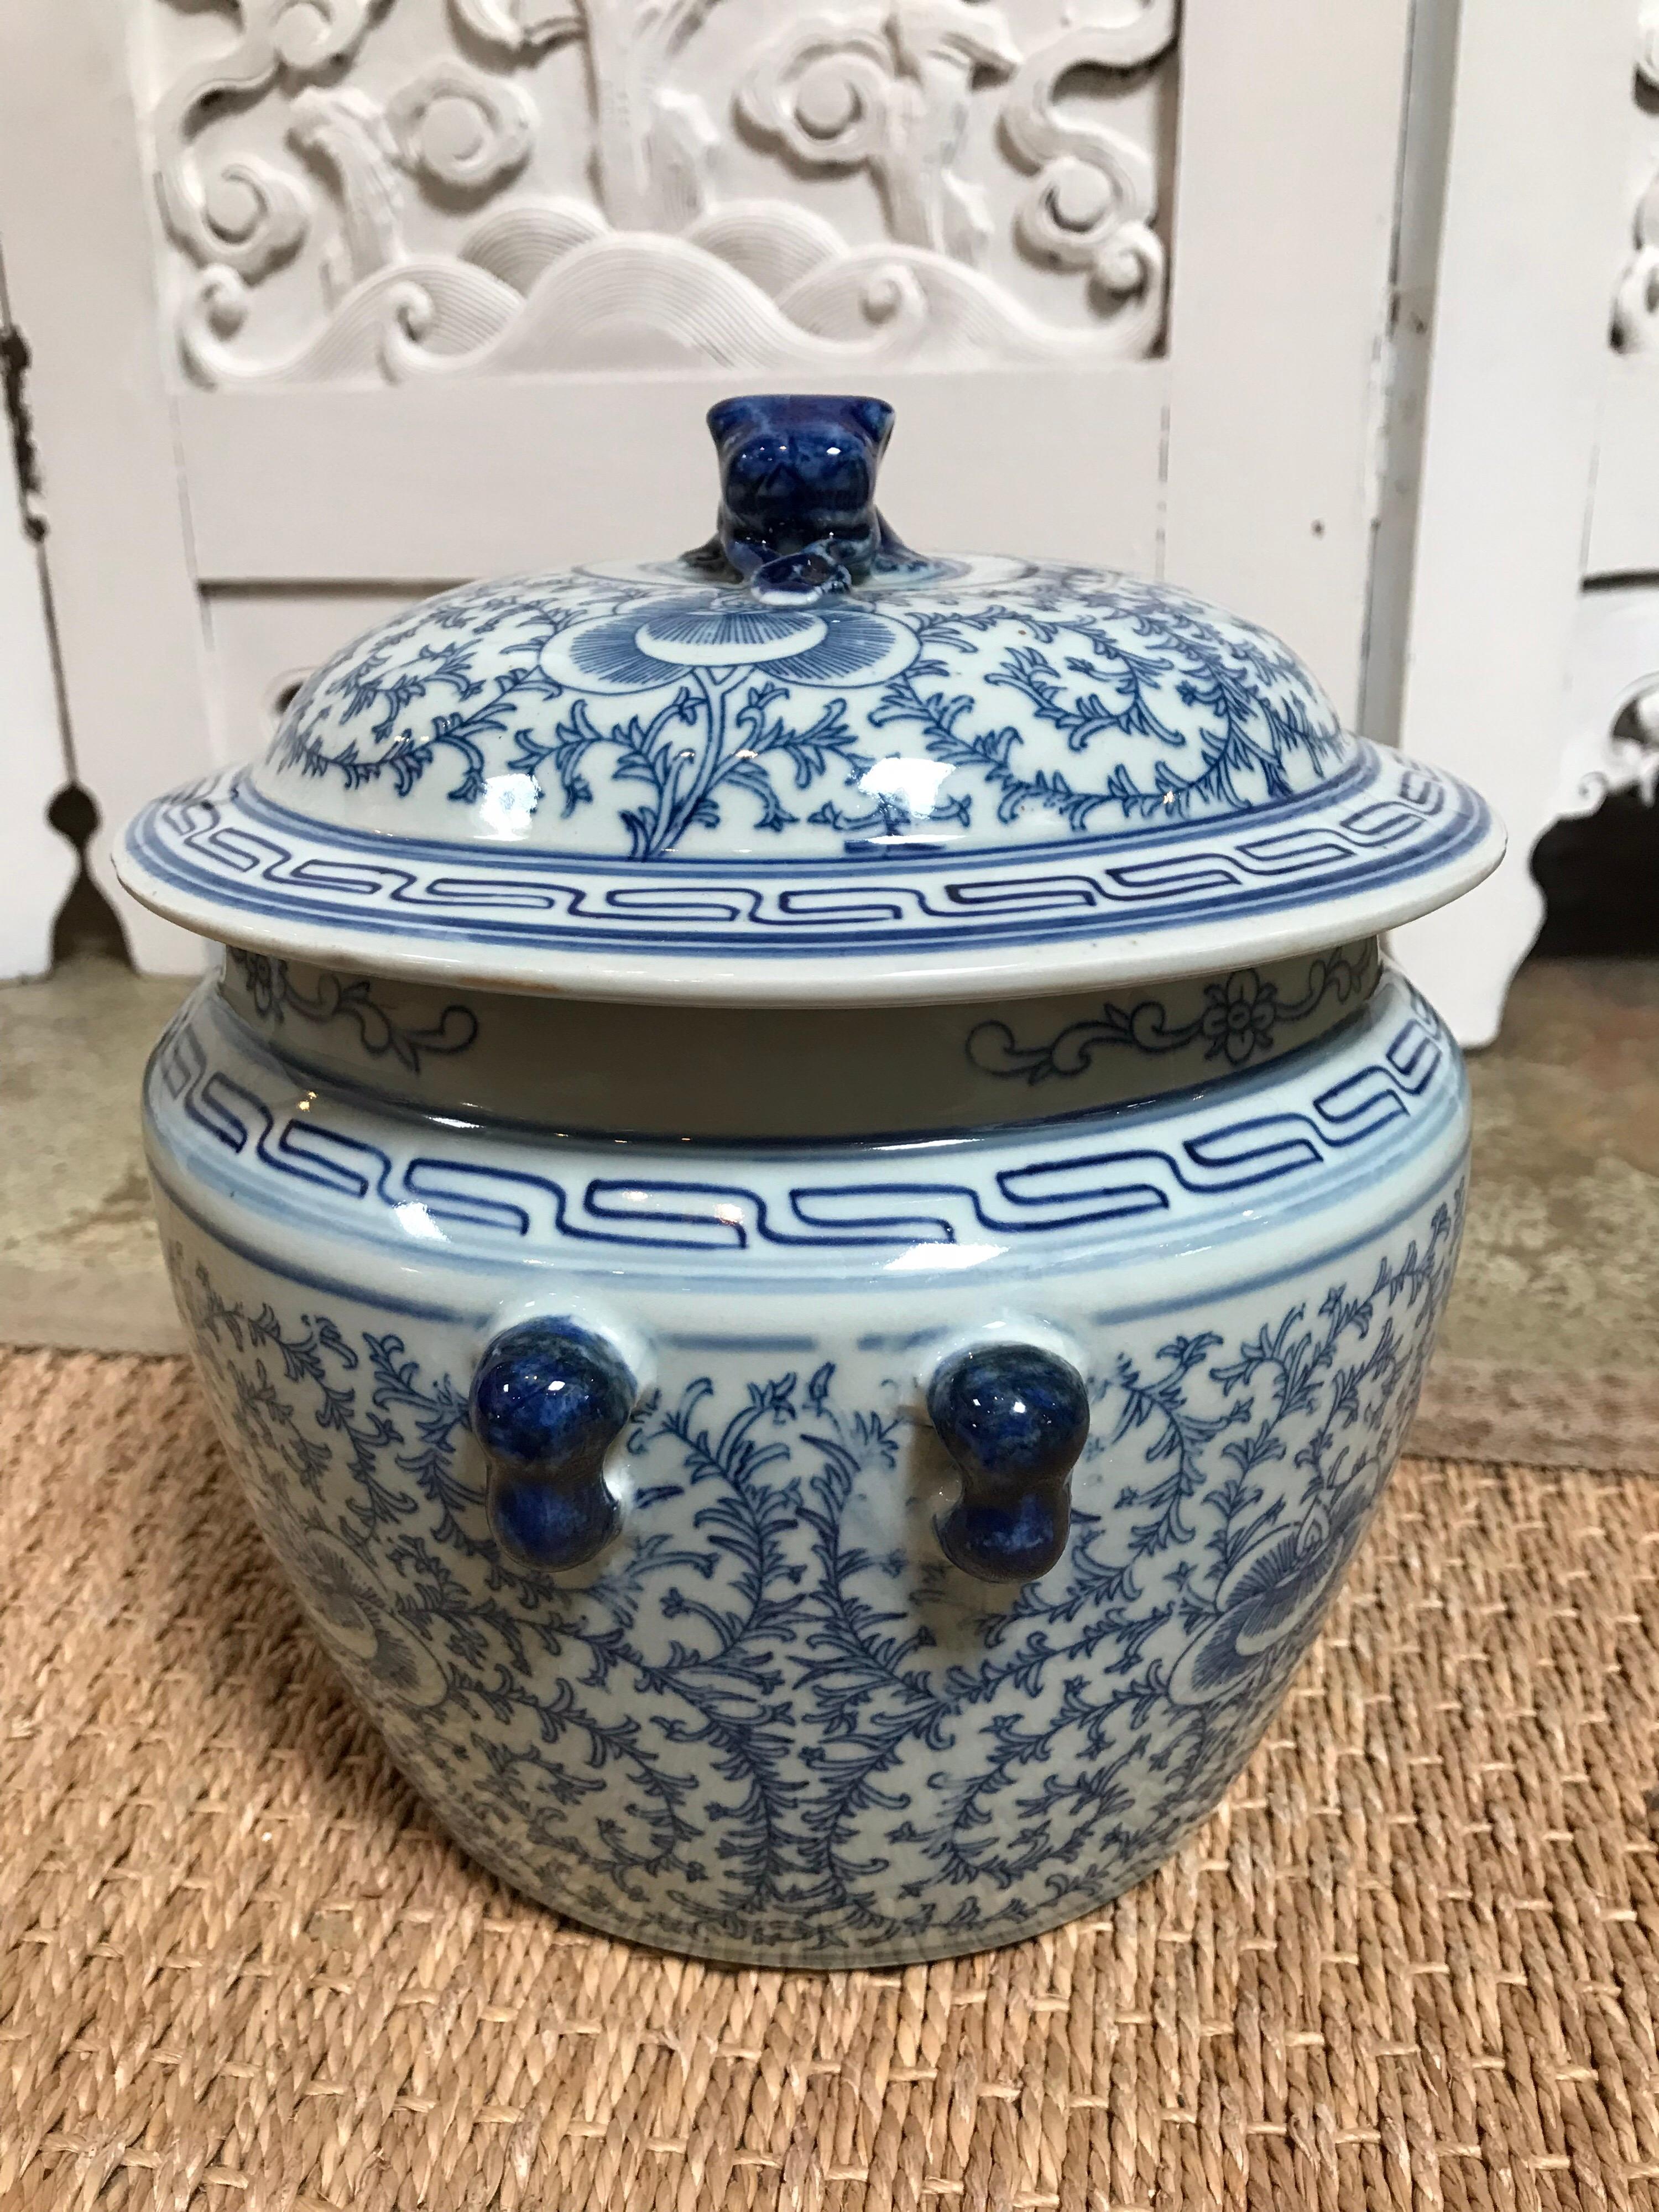 This blue and white ceramic Chinese pot is decorated in Classic blue spiraling vines sprouting from a center flower on a white background. There is also an animal figure laying down atop the lid with blue round handles on either side of the pot.